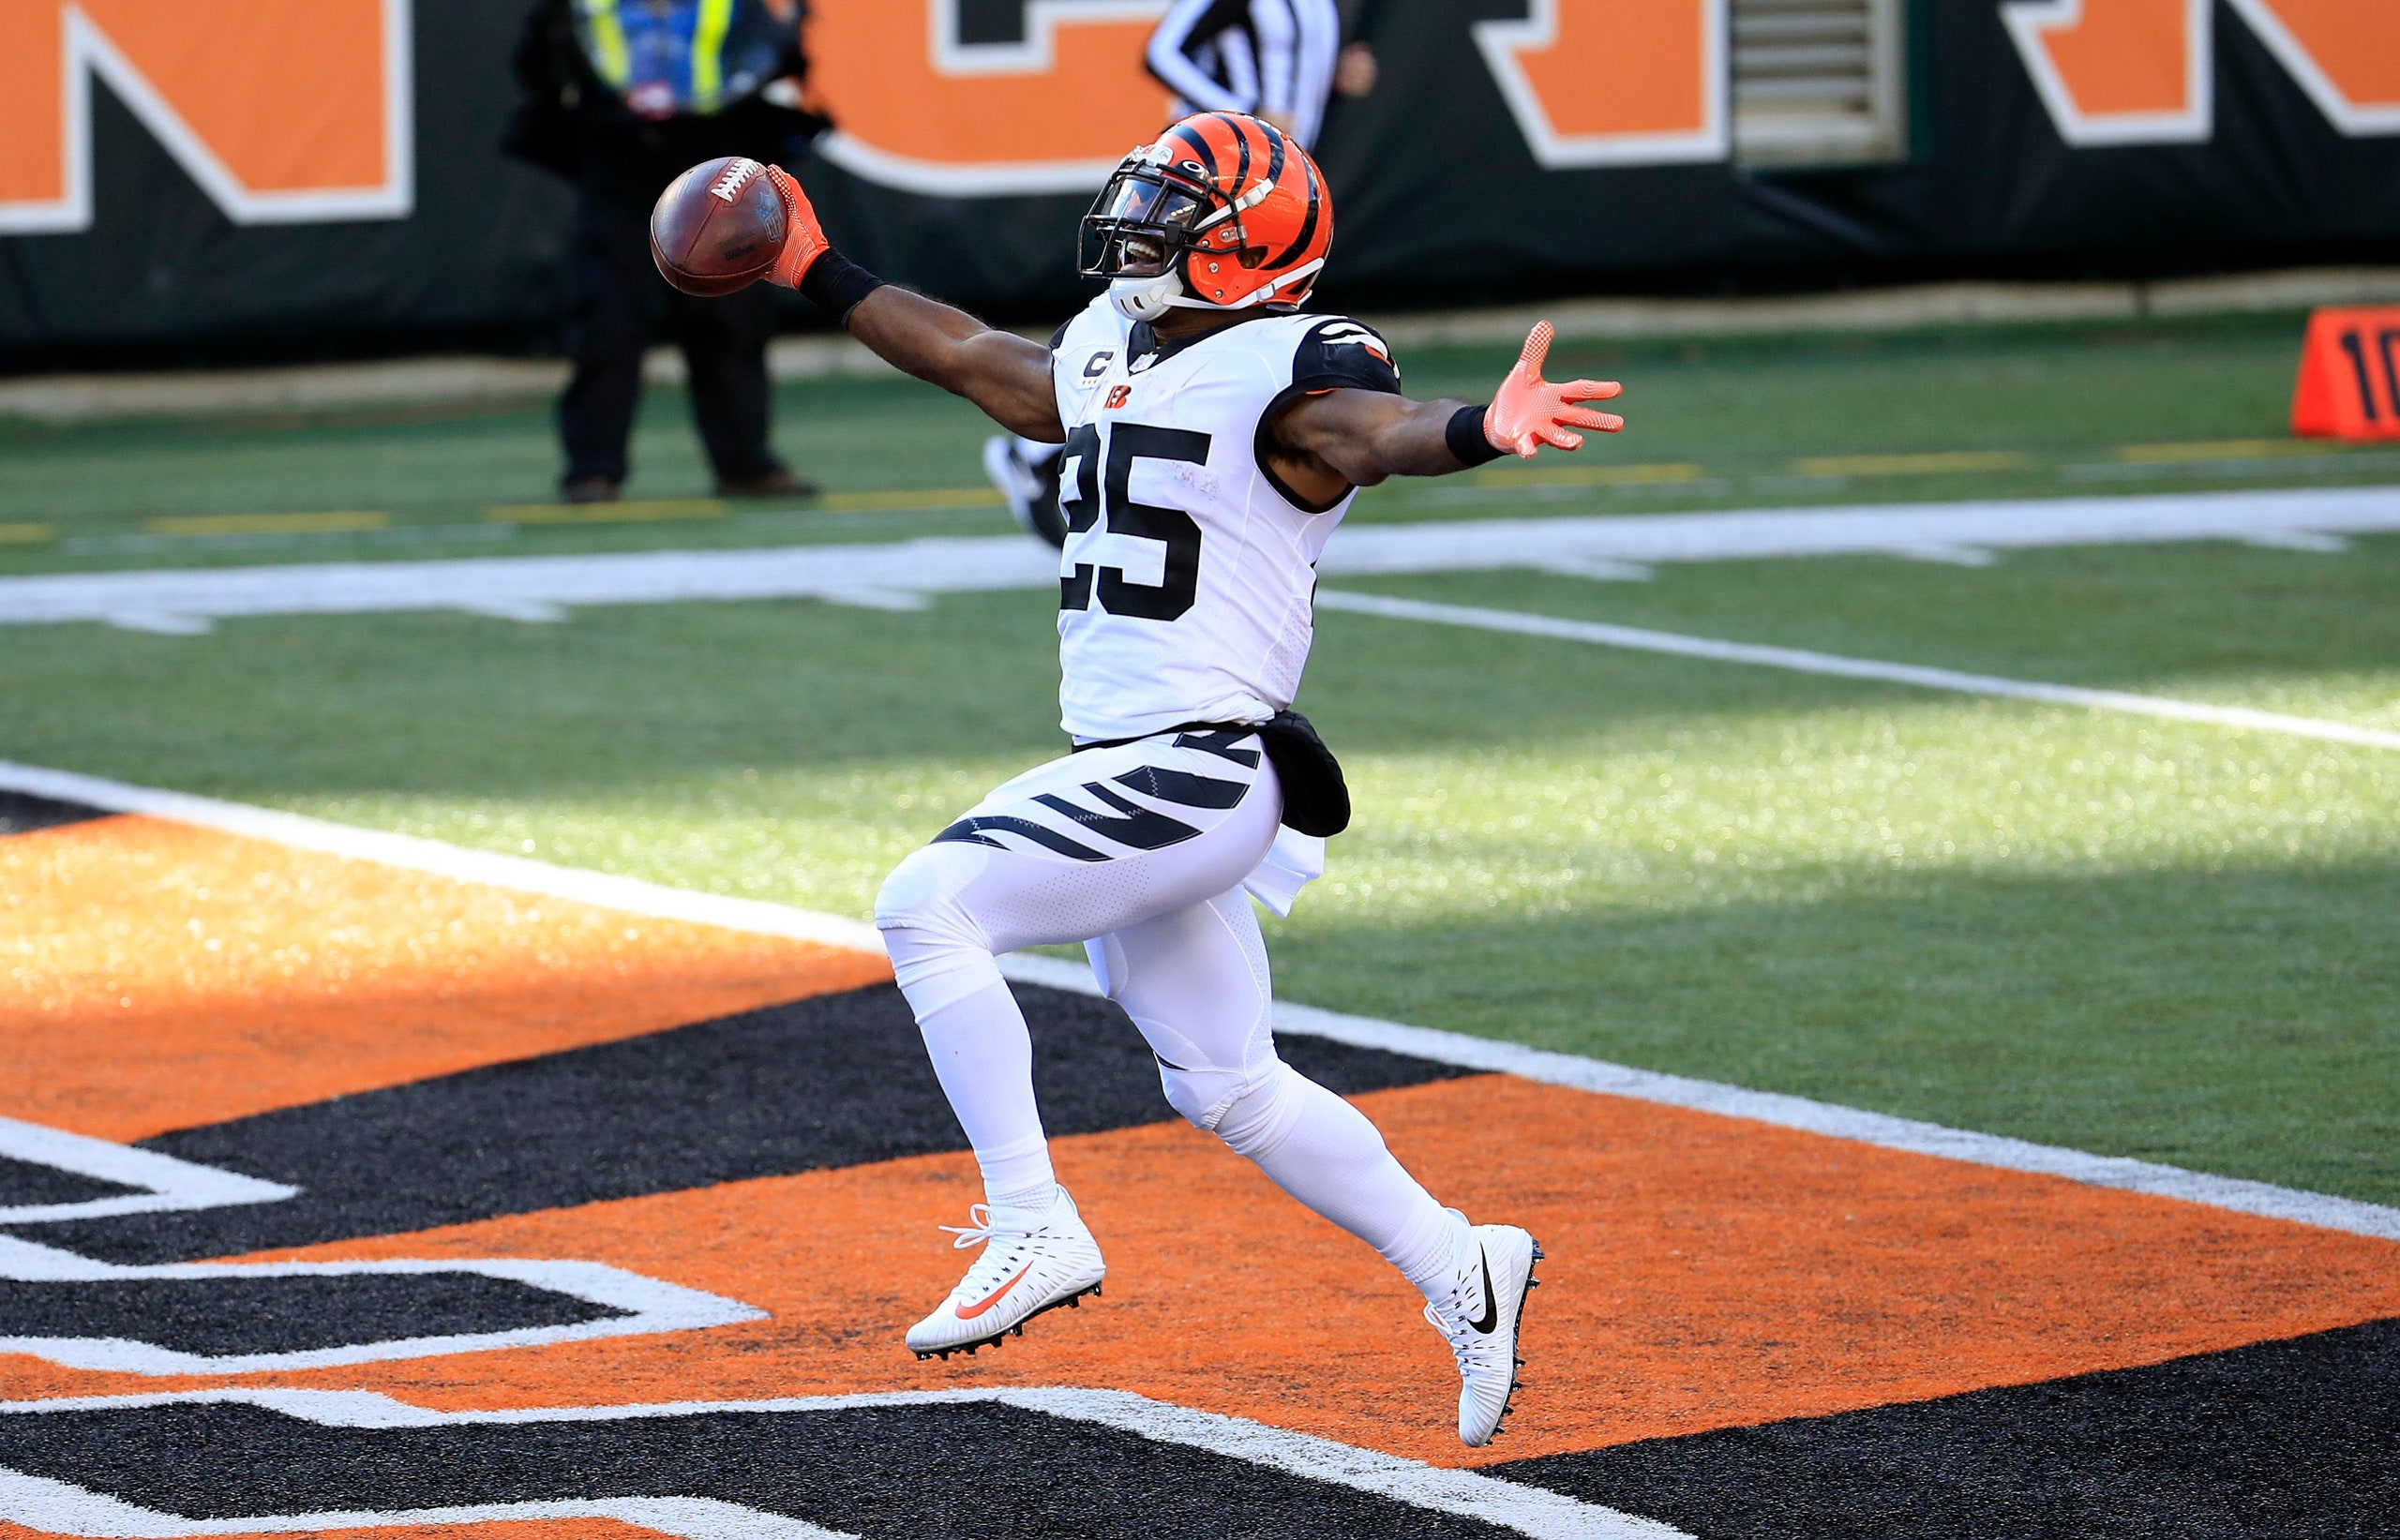 A Cincinnati Bengals football player runs over the finish line with his hands outstretched joyously